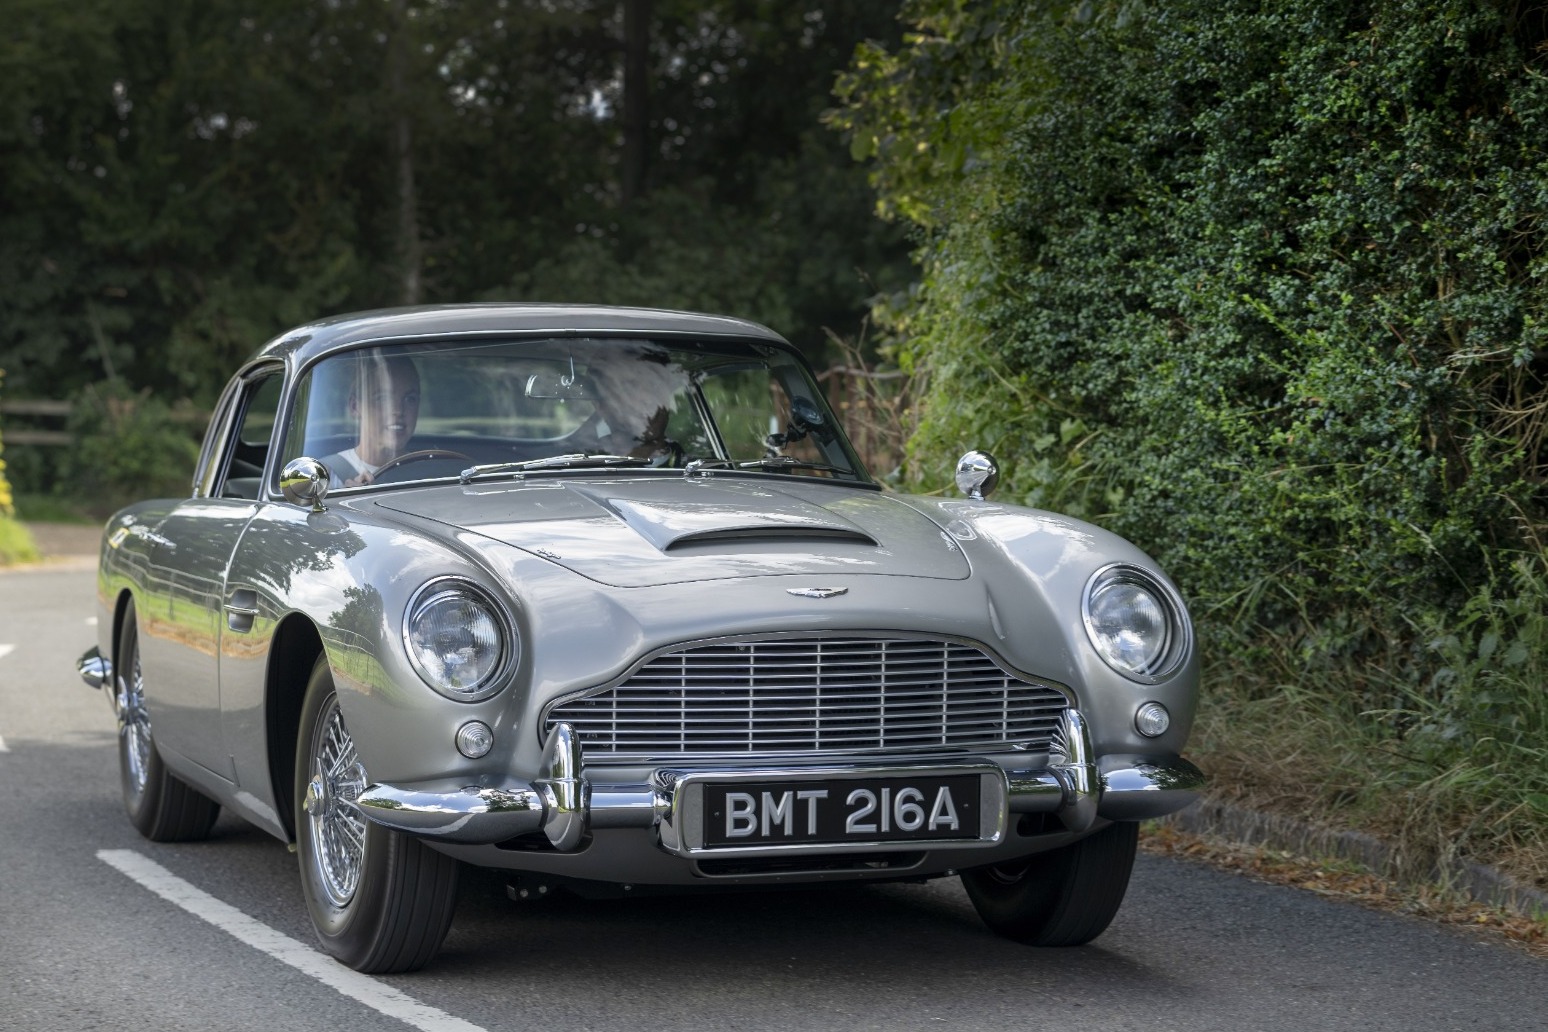 James Bond star Sir Sean Connery’s Aston Martin DB5 is up for sale 